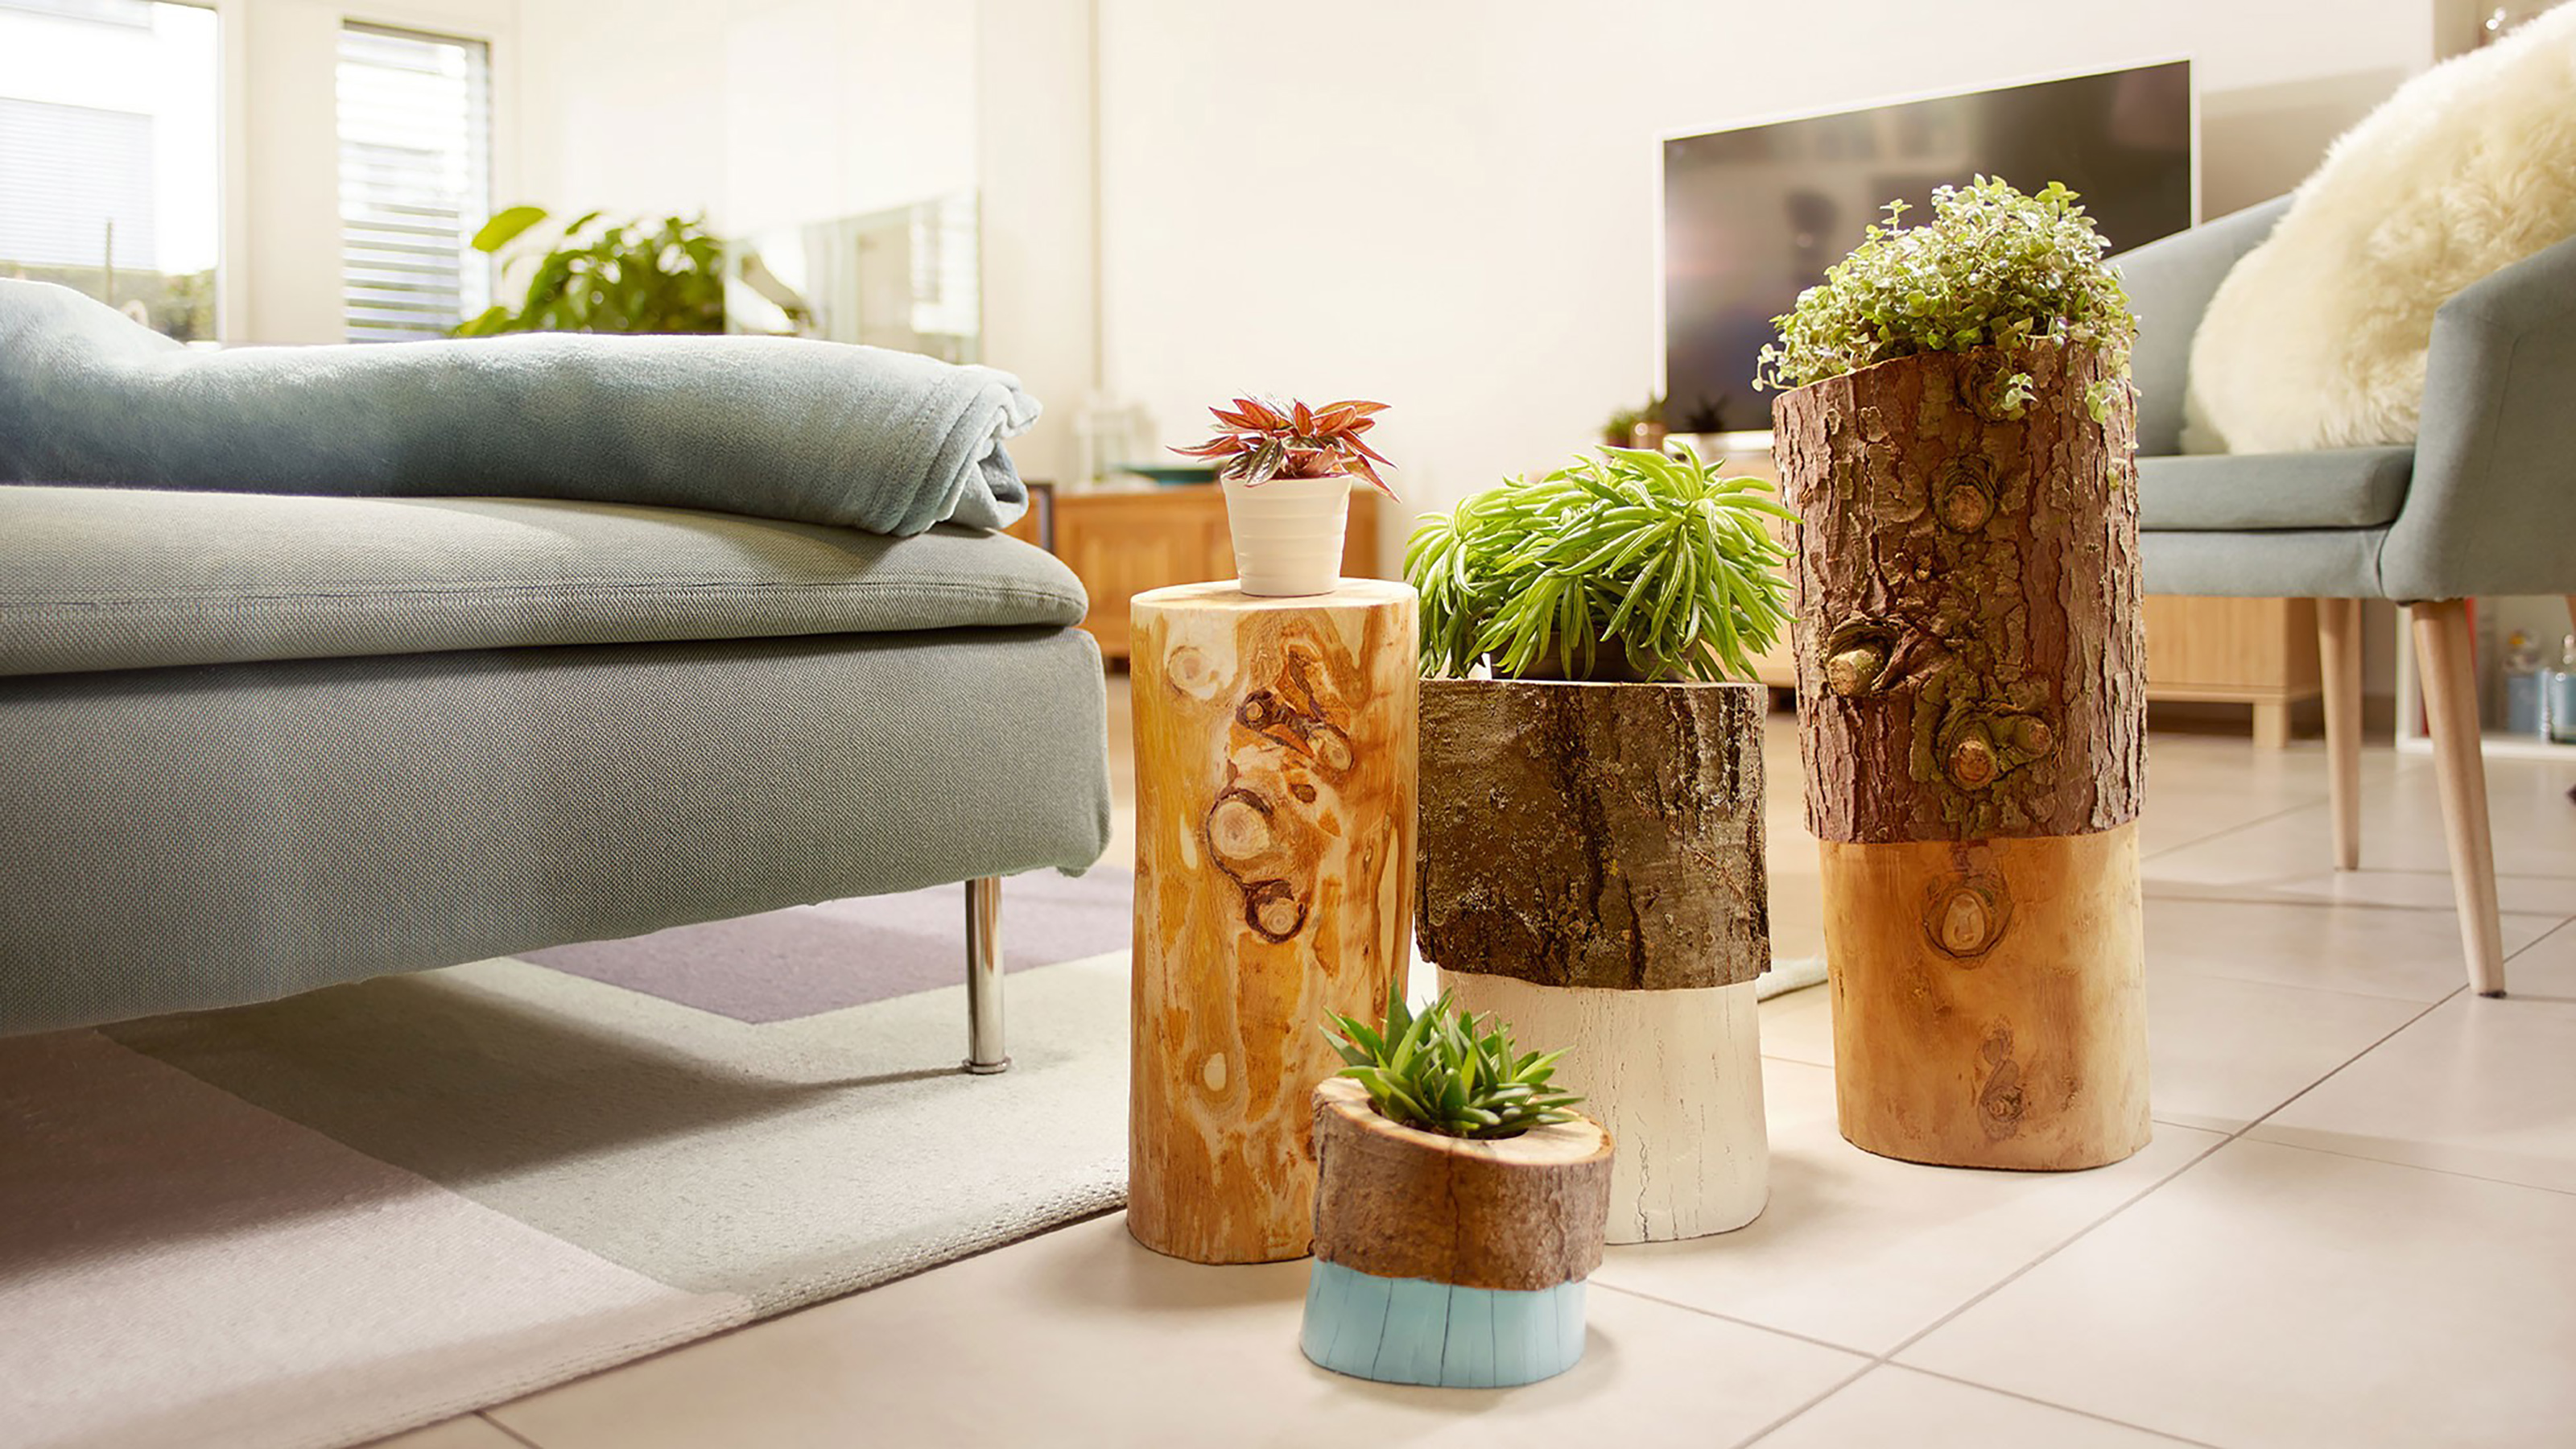 Image of Flowerpot filled with wood chips